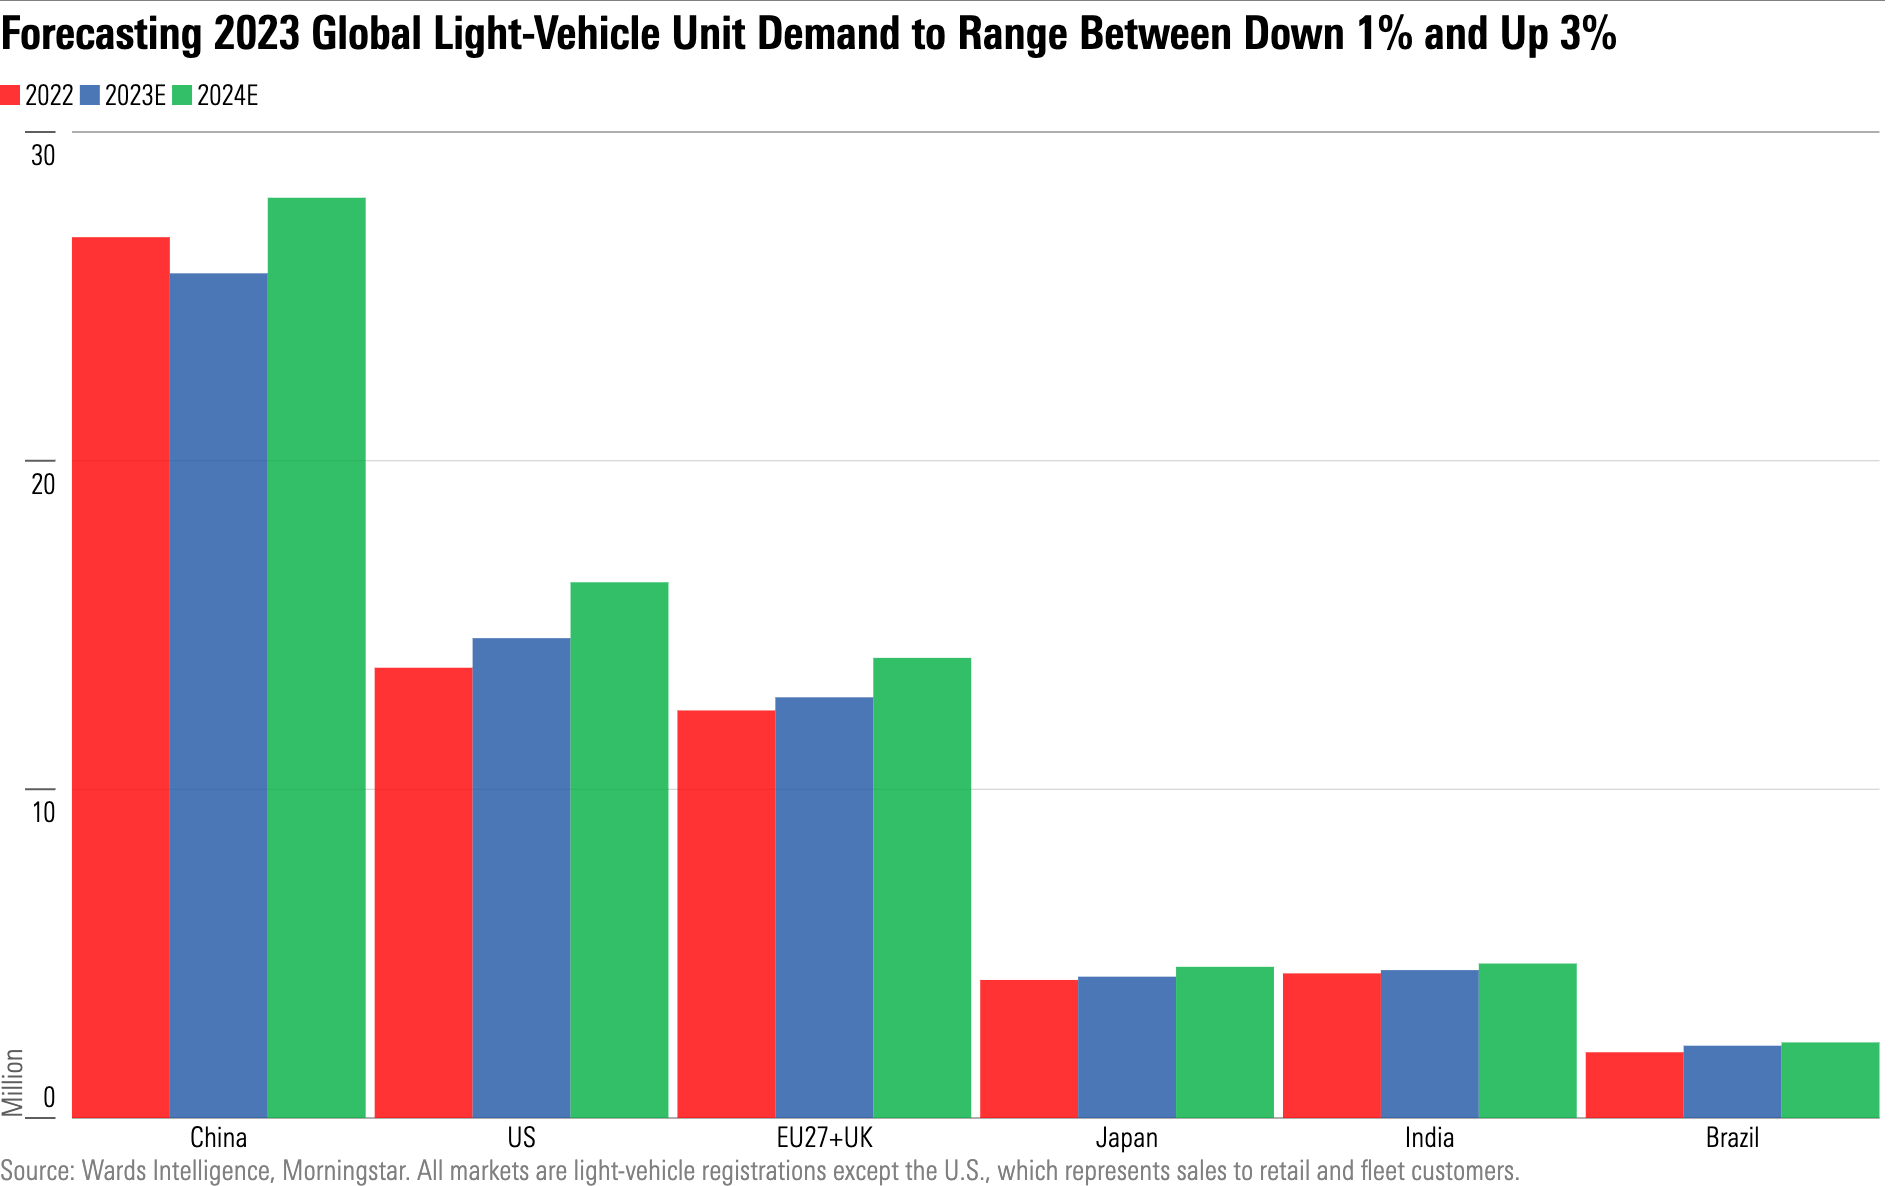 Bar chart showing our forecasts for light-vehicle sales in China, the US, Europe, Japan, India, and Brazil.